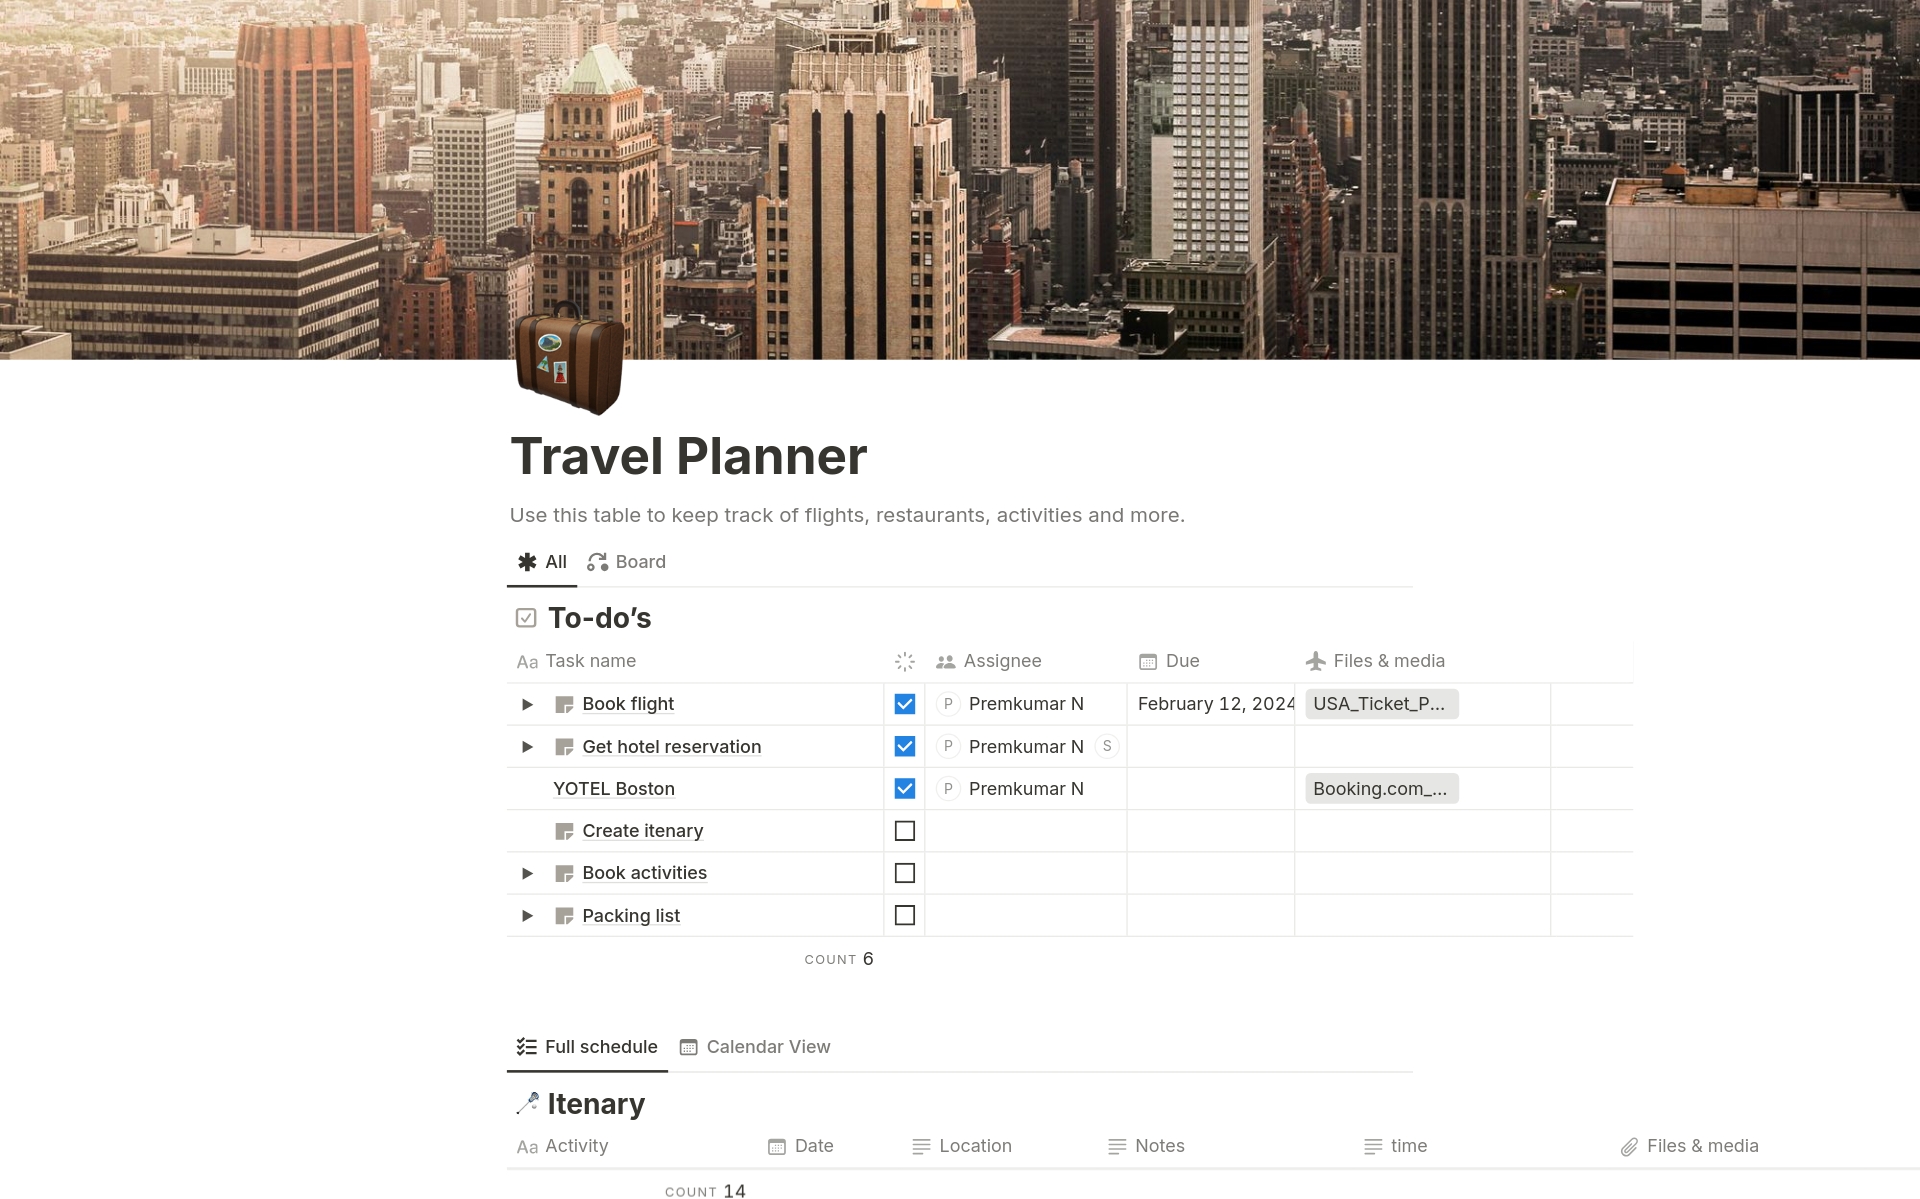 Plan your perfect trip with our Travel Planner template. This template includes detailed examples for trips to USA destinations like Boston and NYC. Organize your itinerary, accommodations, activities, and more, all in one place. Make your travel planning seamless and stress-free